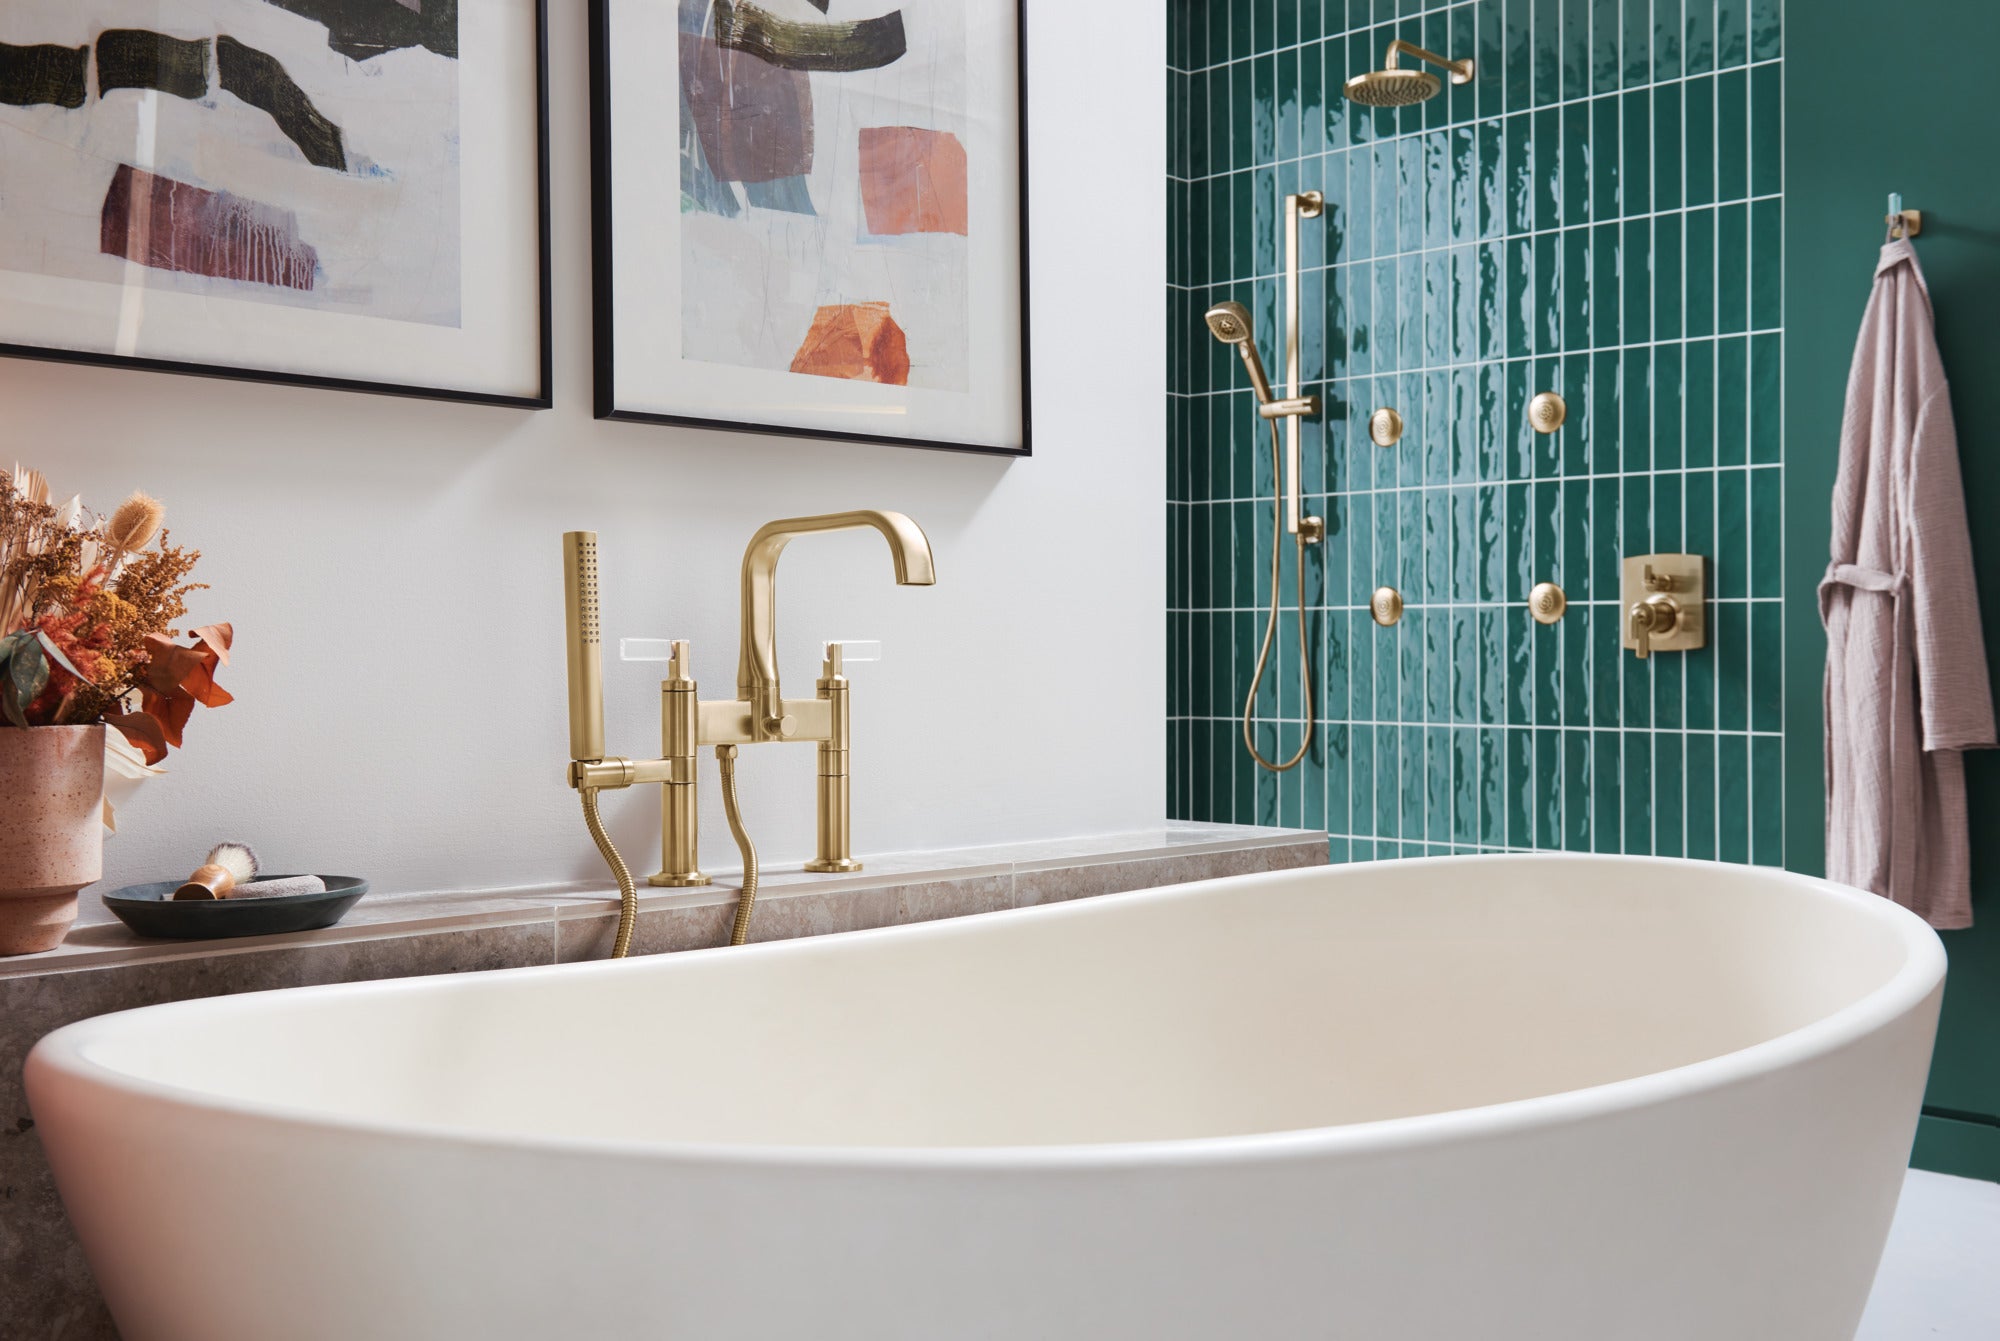 luxe gold tub filler unions